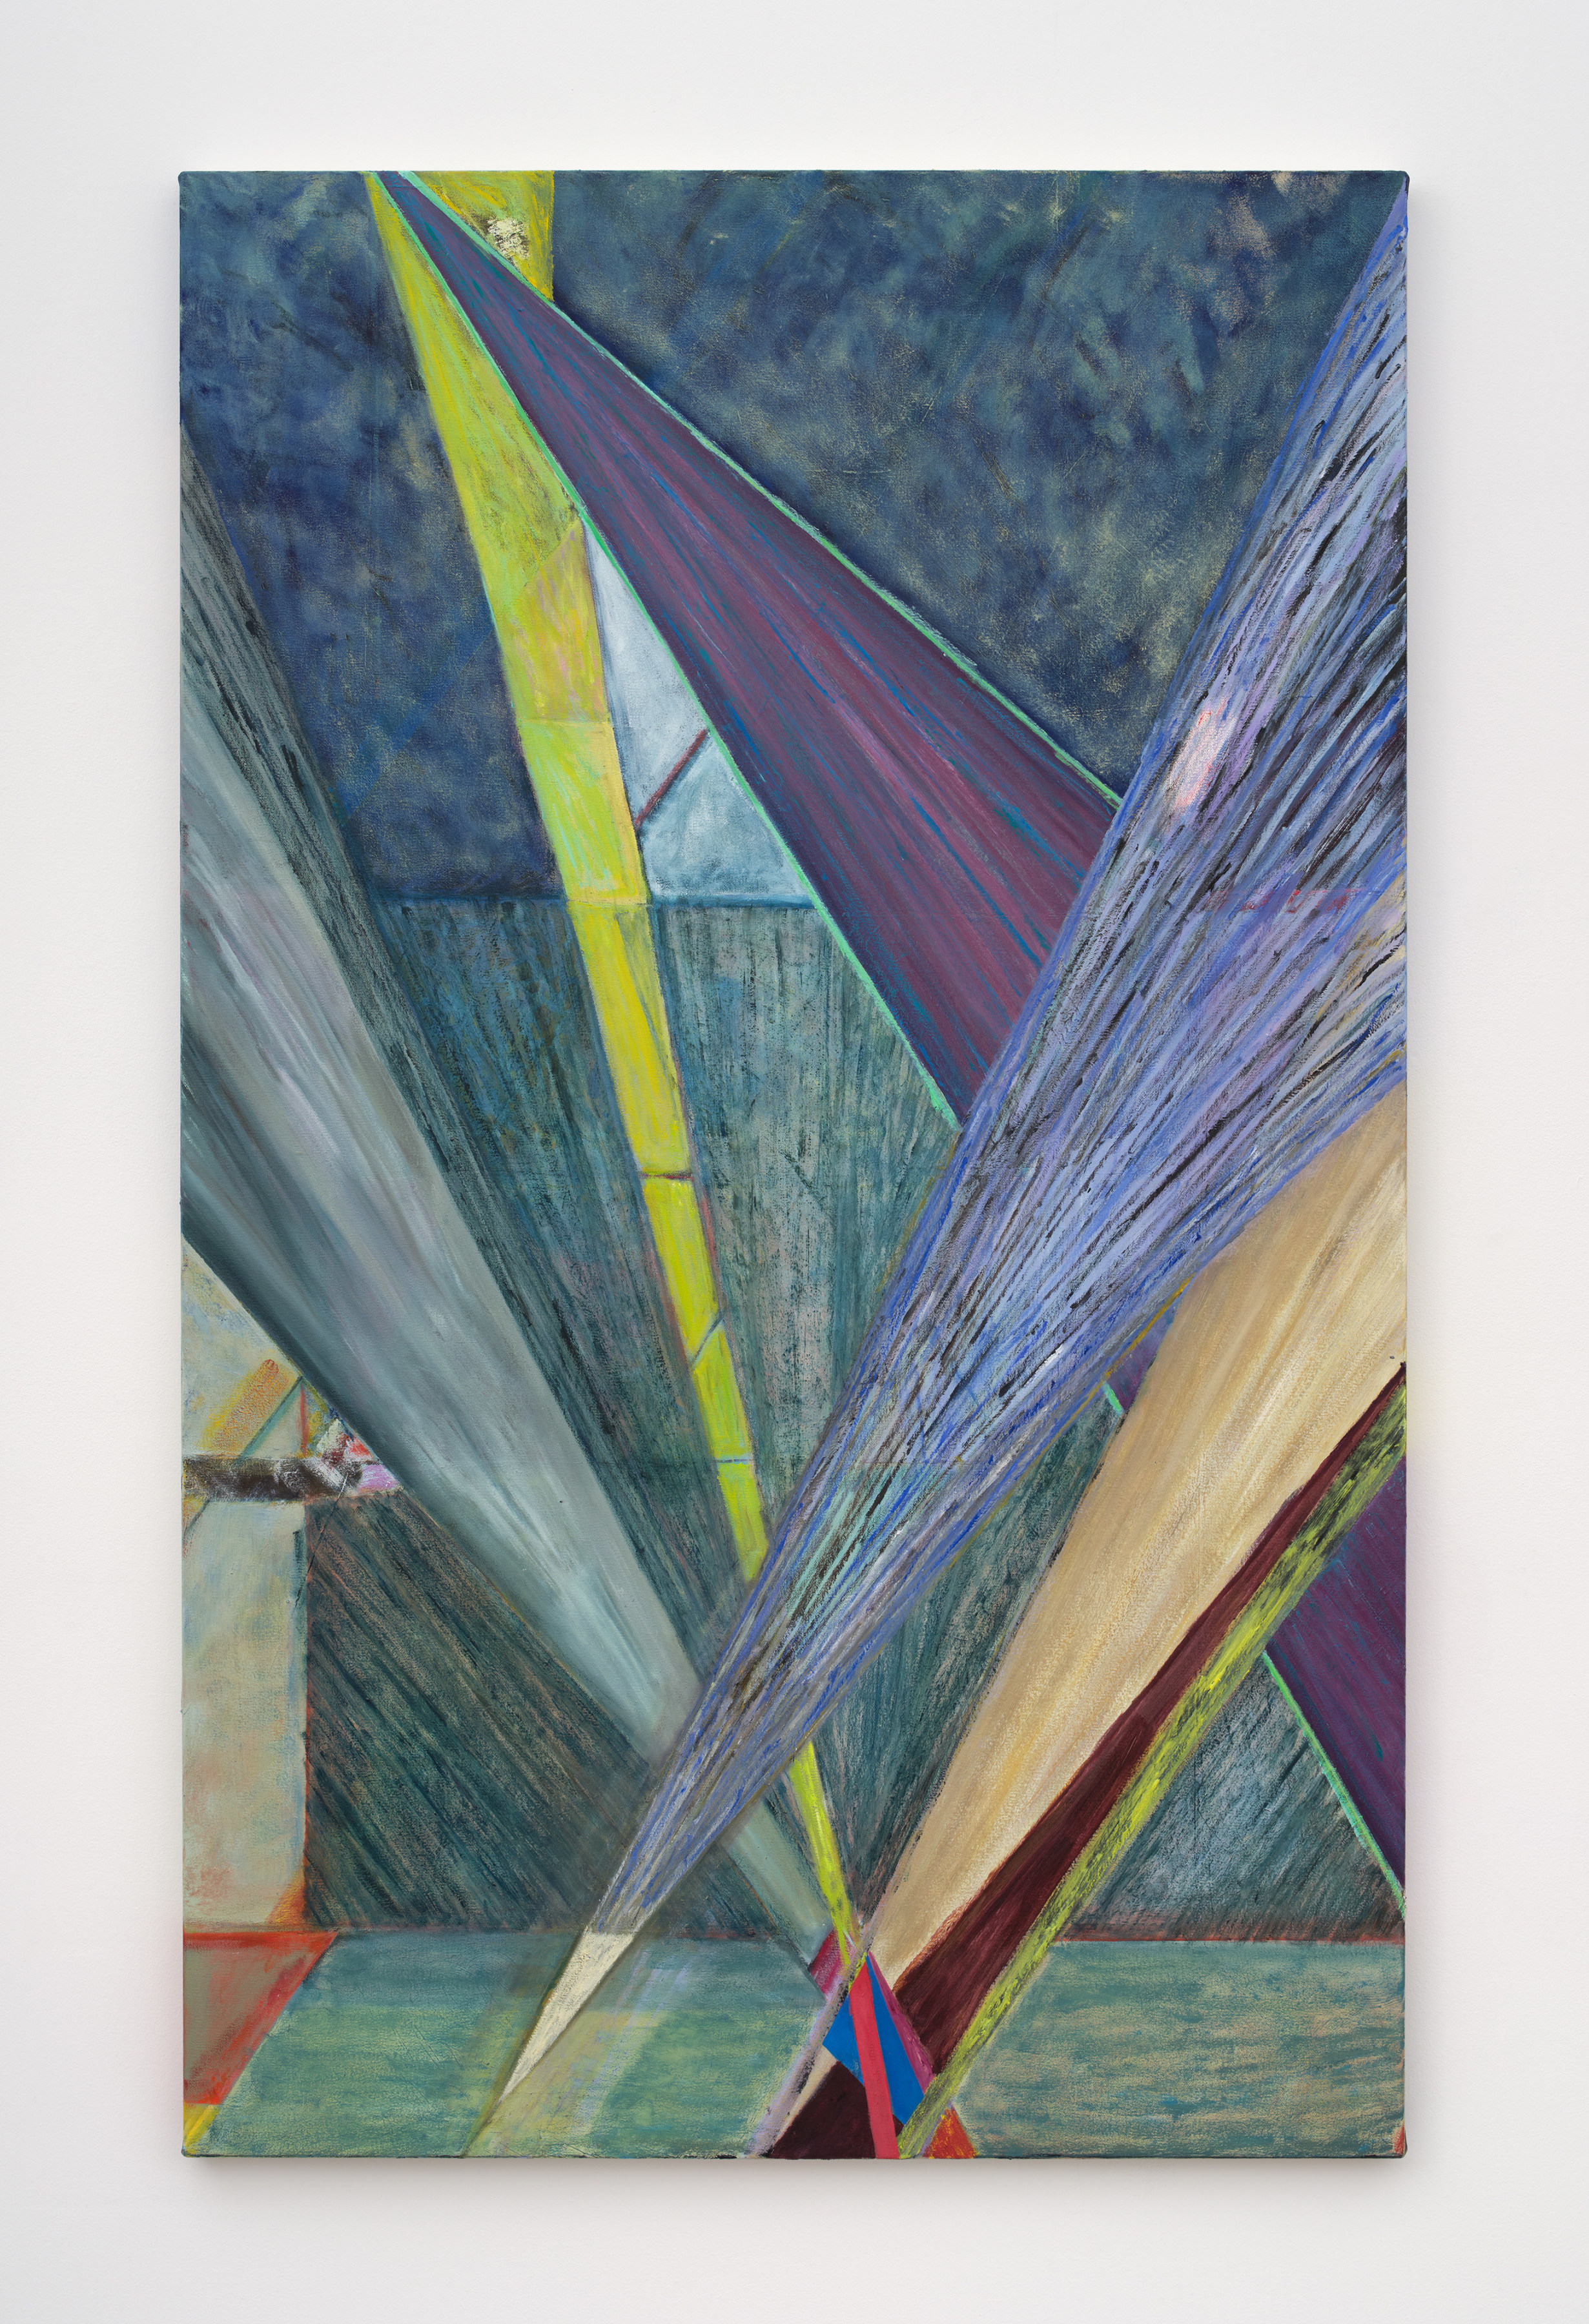 An geometric abstract painting with teal, purple and green triangular shapes.